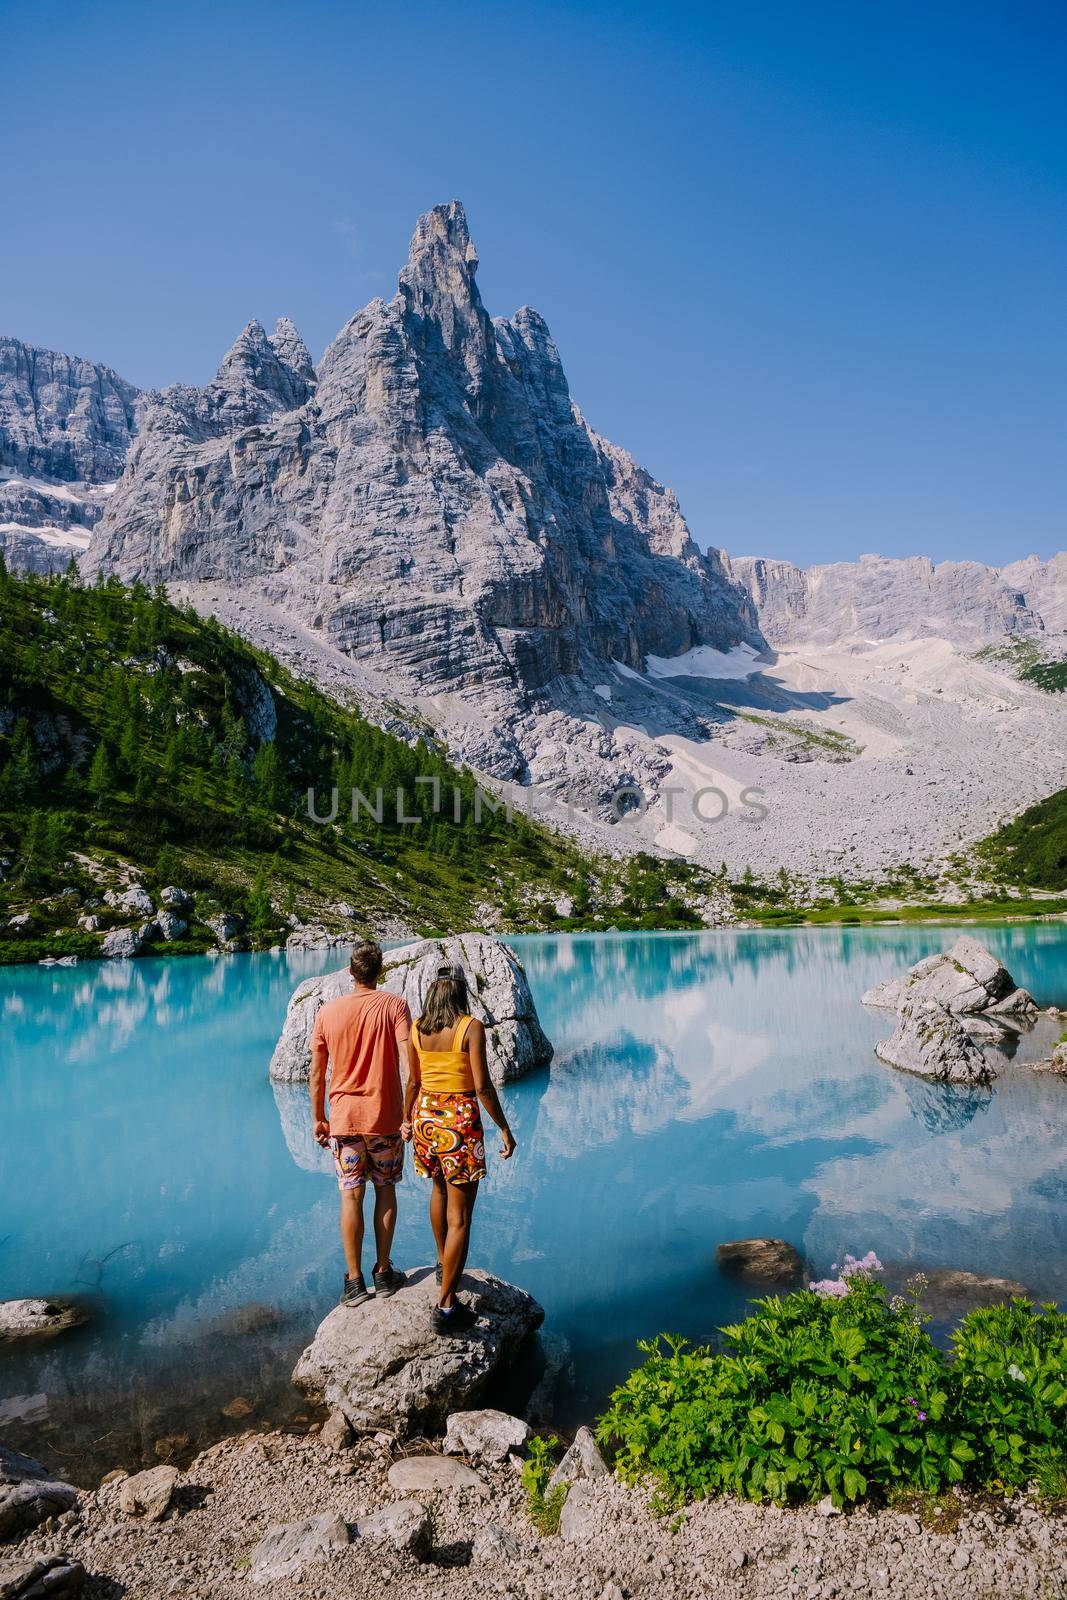 Lake Sorapis Italian Dolomites, Morning with clear sky on Lago di Sorapis in Italian Dolomites, lake with unique turquoise color water in Belluno province in Nothern Italy. couple in the mountains